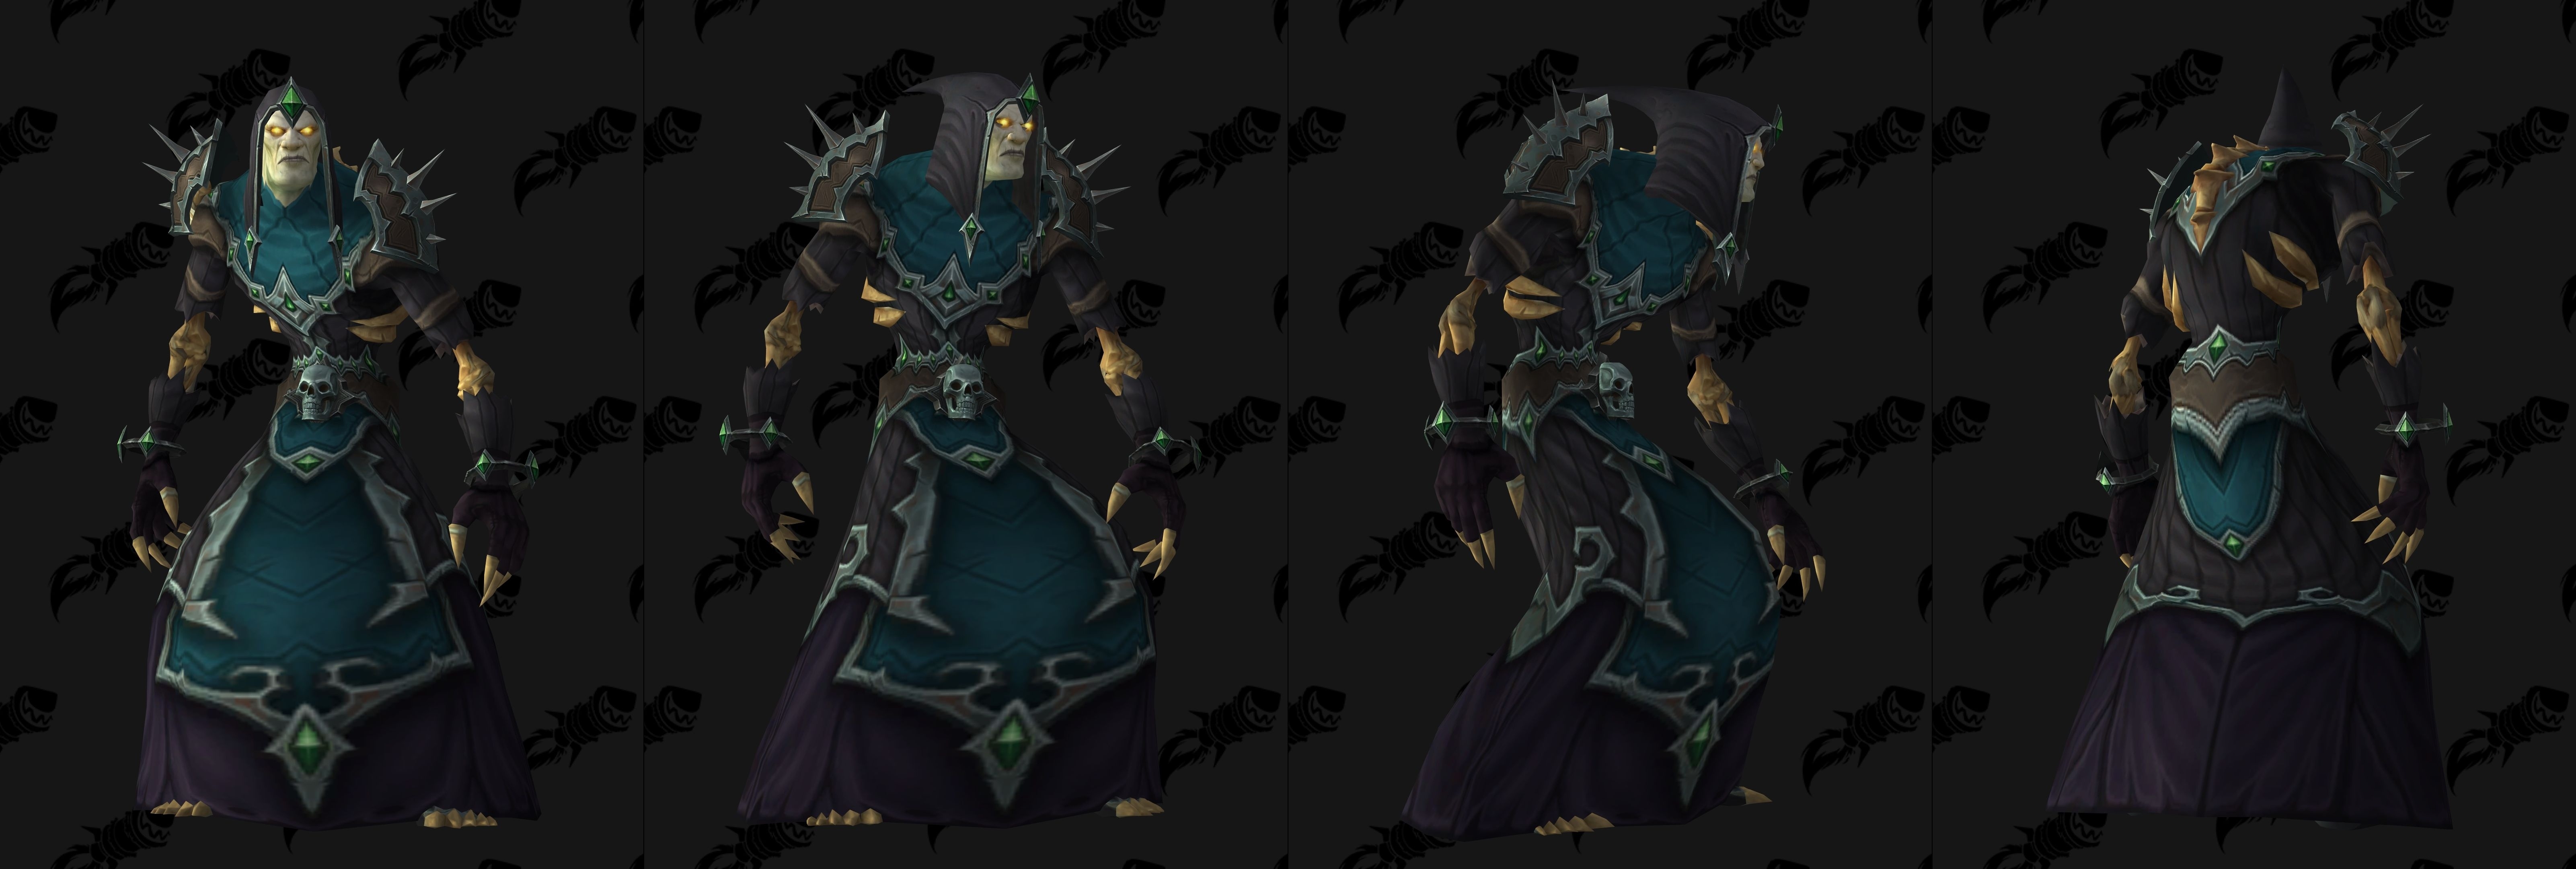 Tails of azeroth blue is better